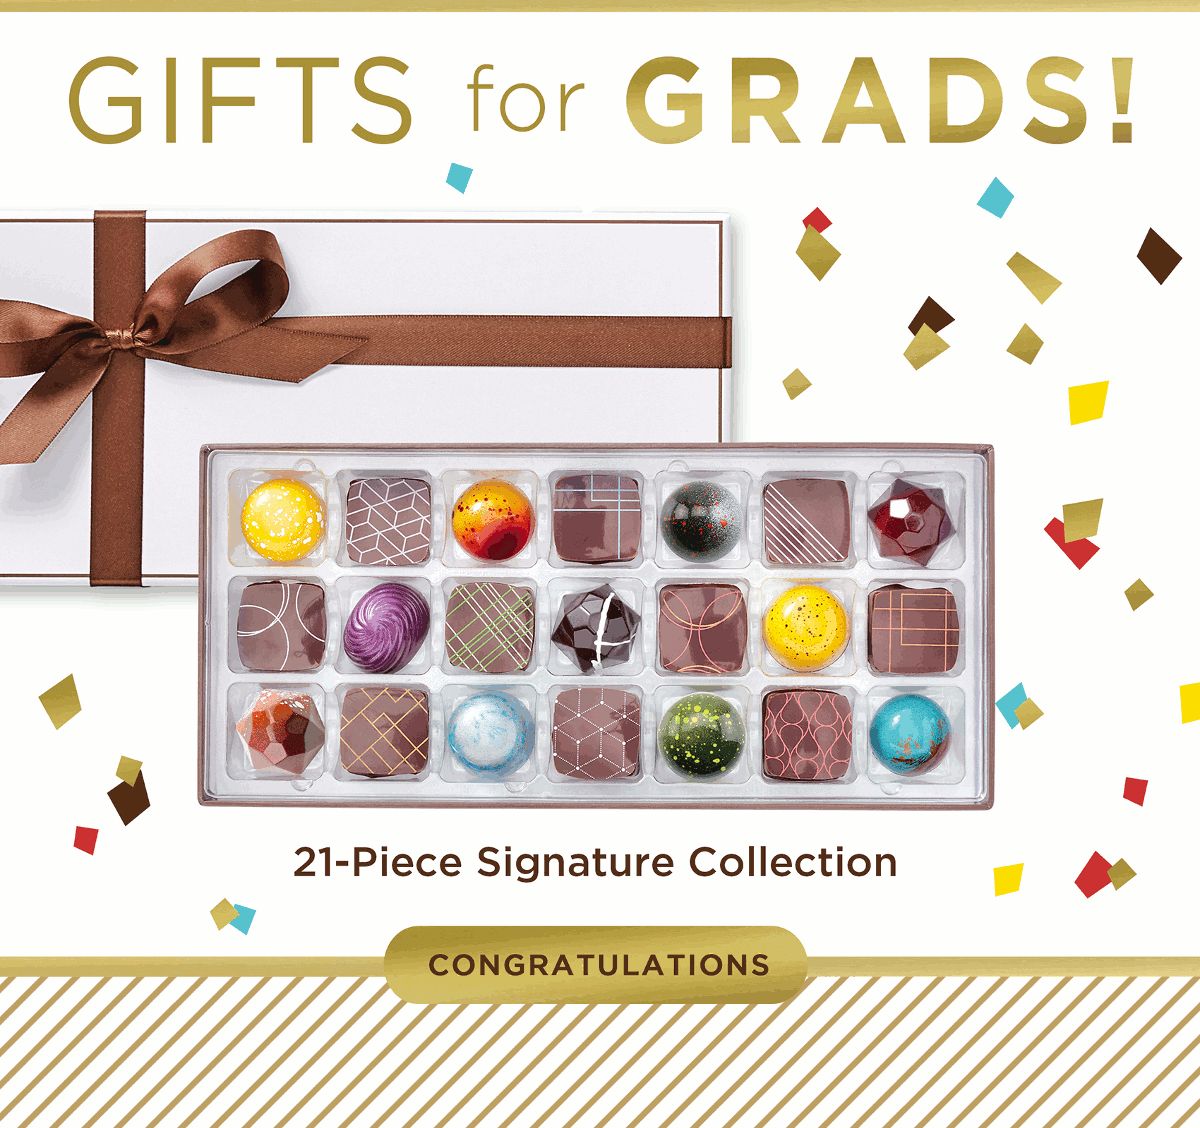 Gifts for grads